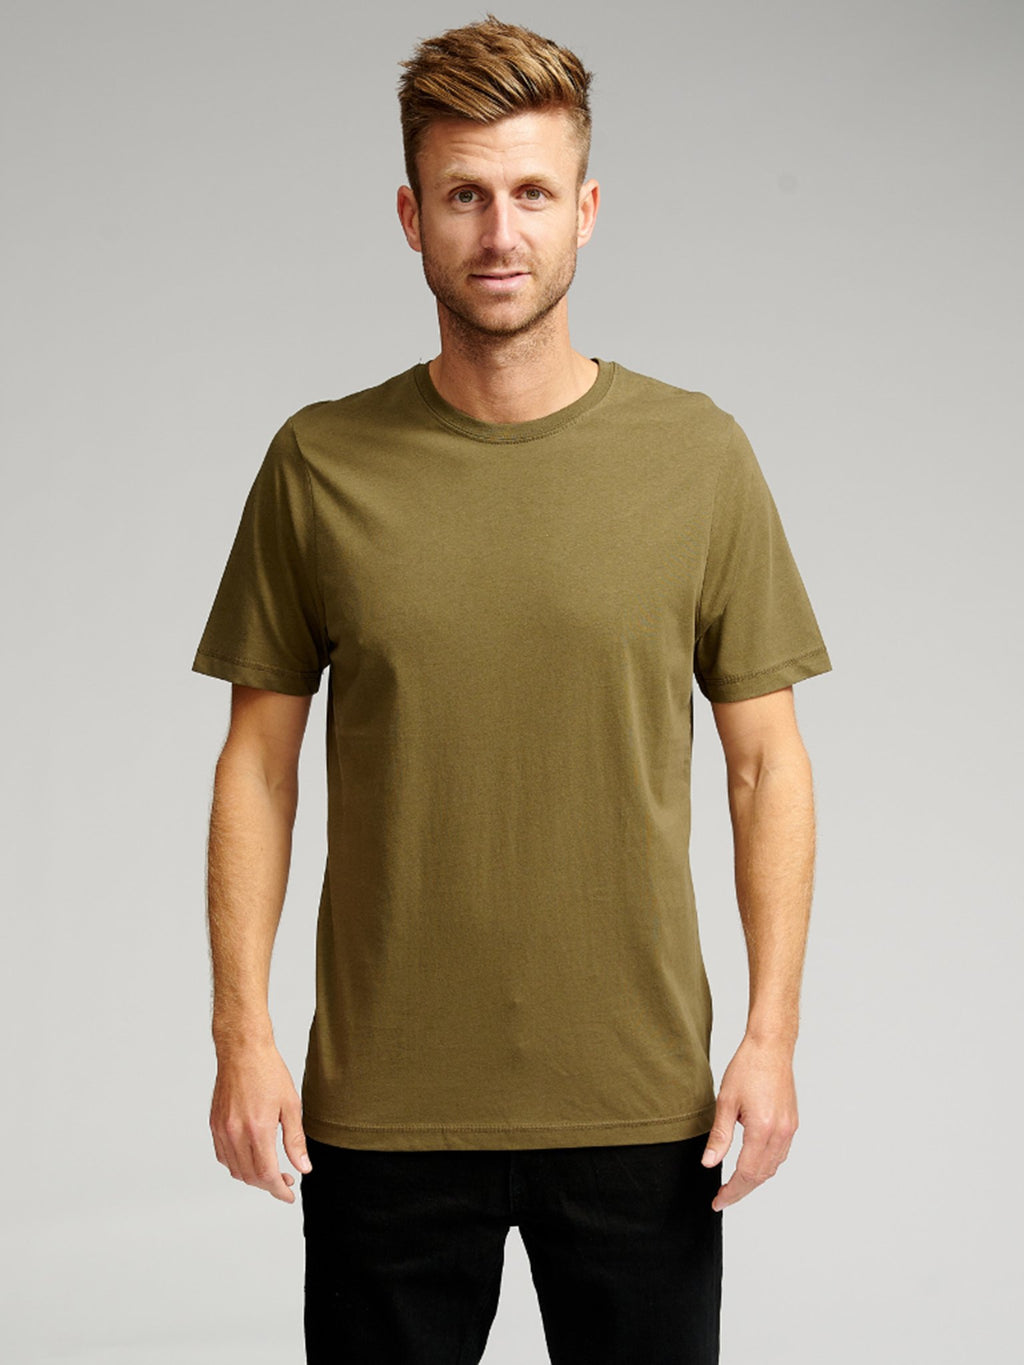 Organic Basic T-shirts – Package Deal 6 pcs. (email)